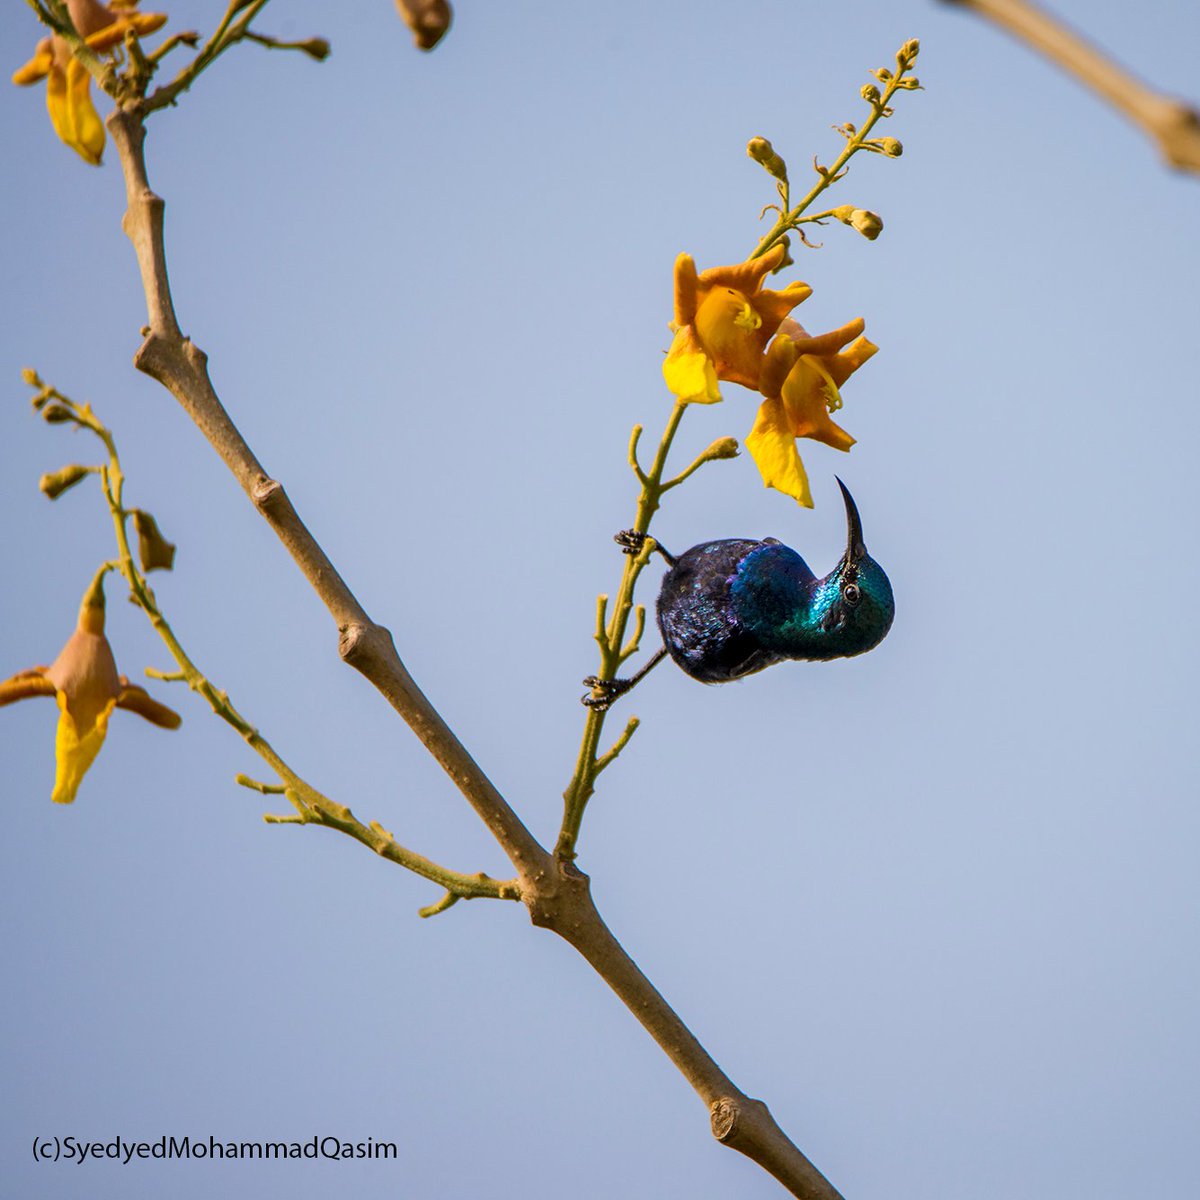 A  #PurpleSunBird enjoying nectar of flowers of  #Gamhar , #GmelinaArborea .Gamhar flowers are rare to see in #Delhi only few trees exist.This sunbird is one of the rare #Delhite who has seen the flowers of Gahmar
Have you seen Gamhar flowering in #Delhi?
#StoriesOfTreesOfDelhi